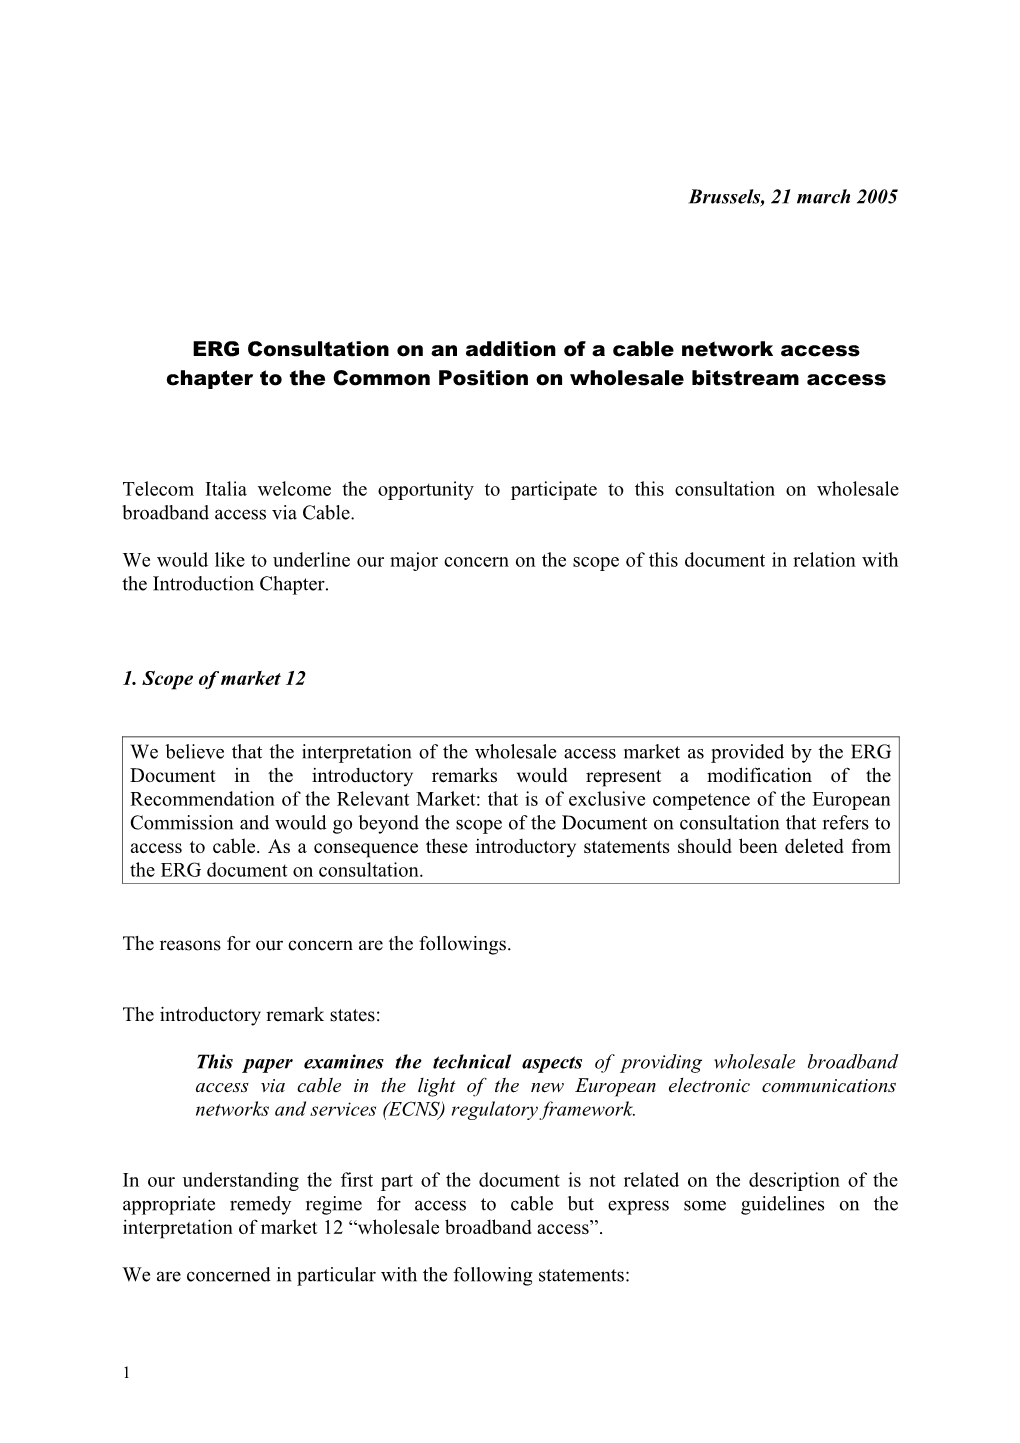 ERG Consultation on an Addition of a Cable Network Access Chapter to the Common Position